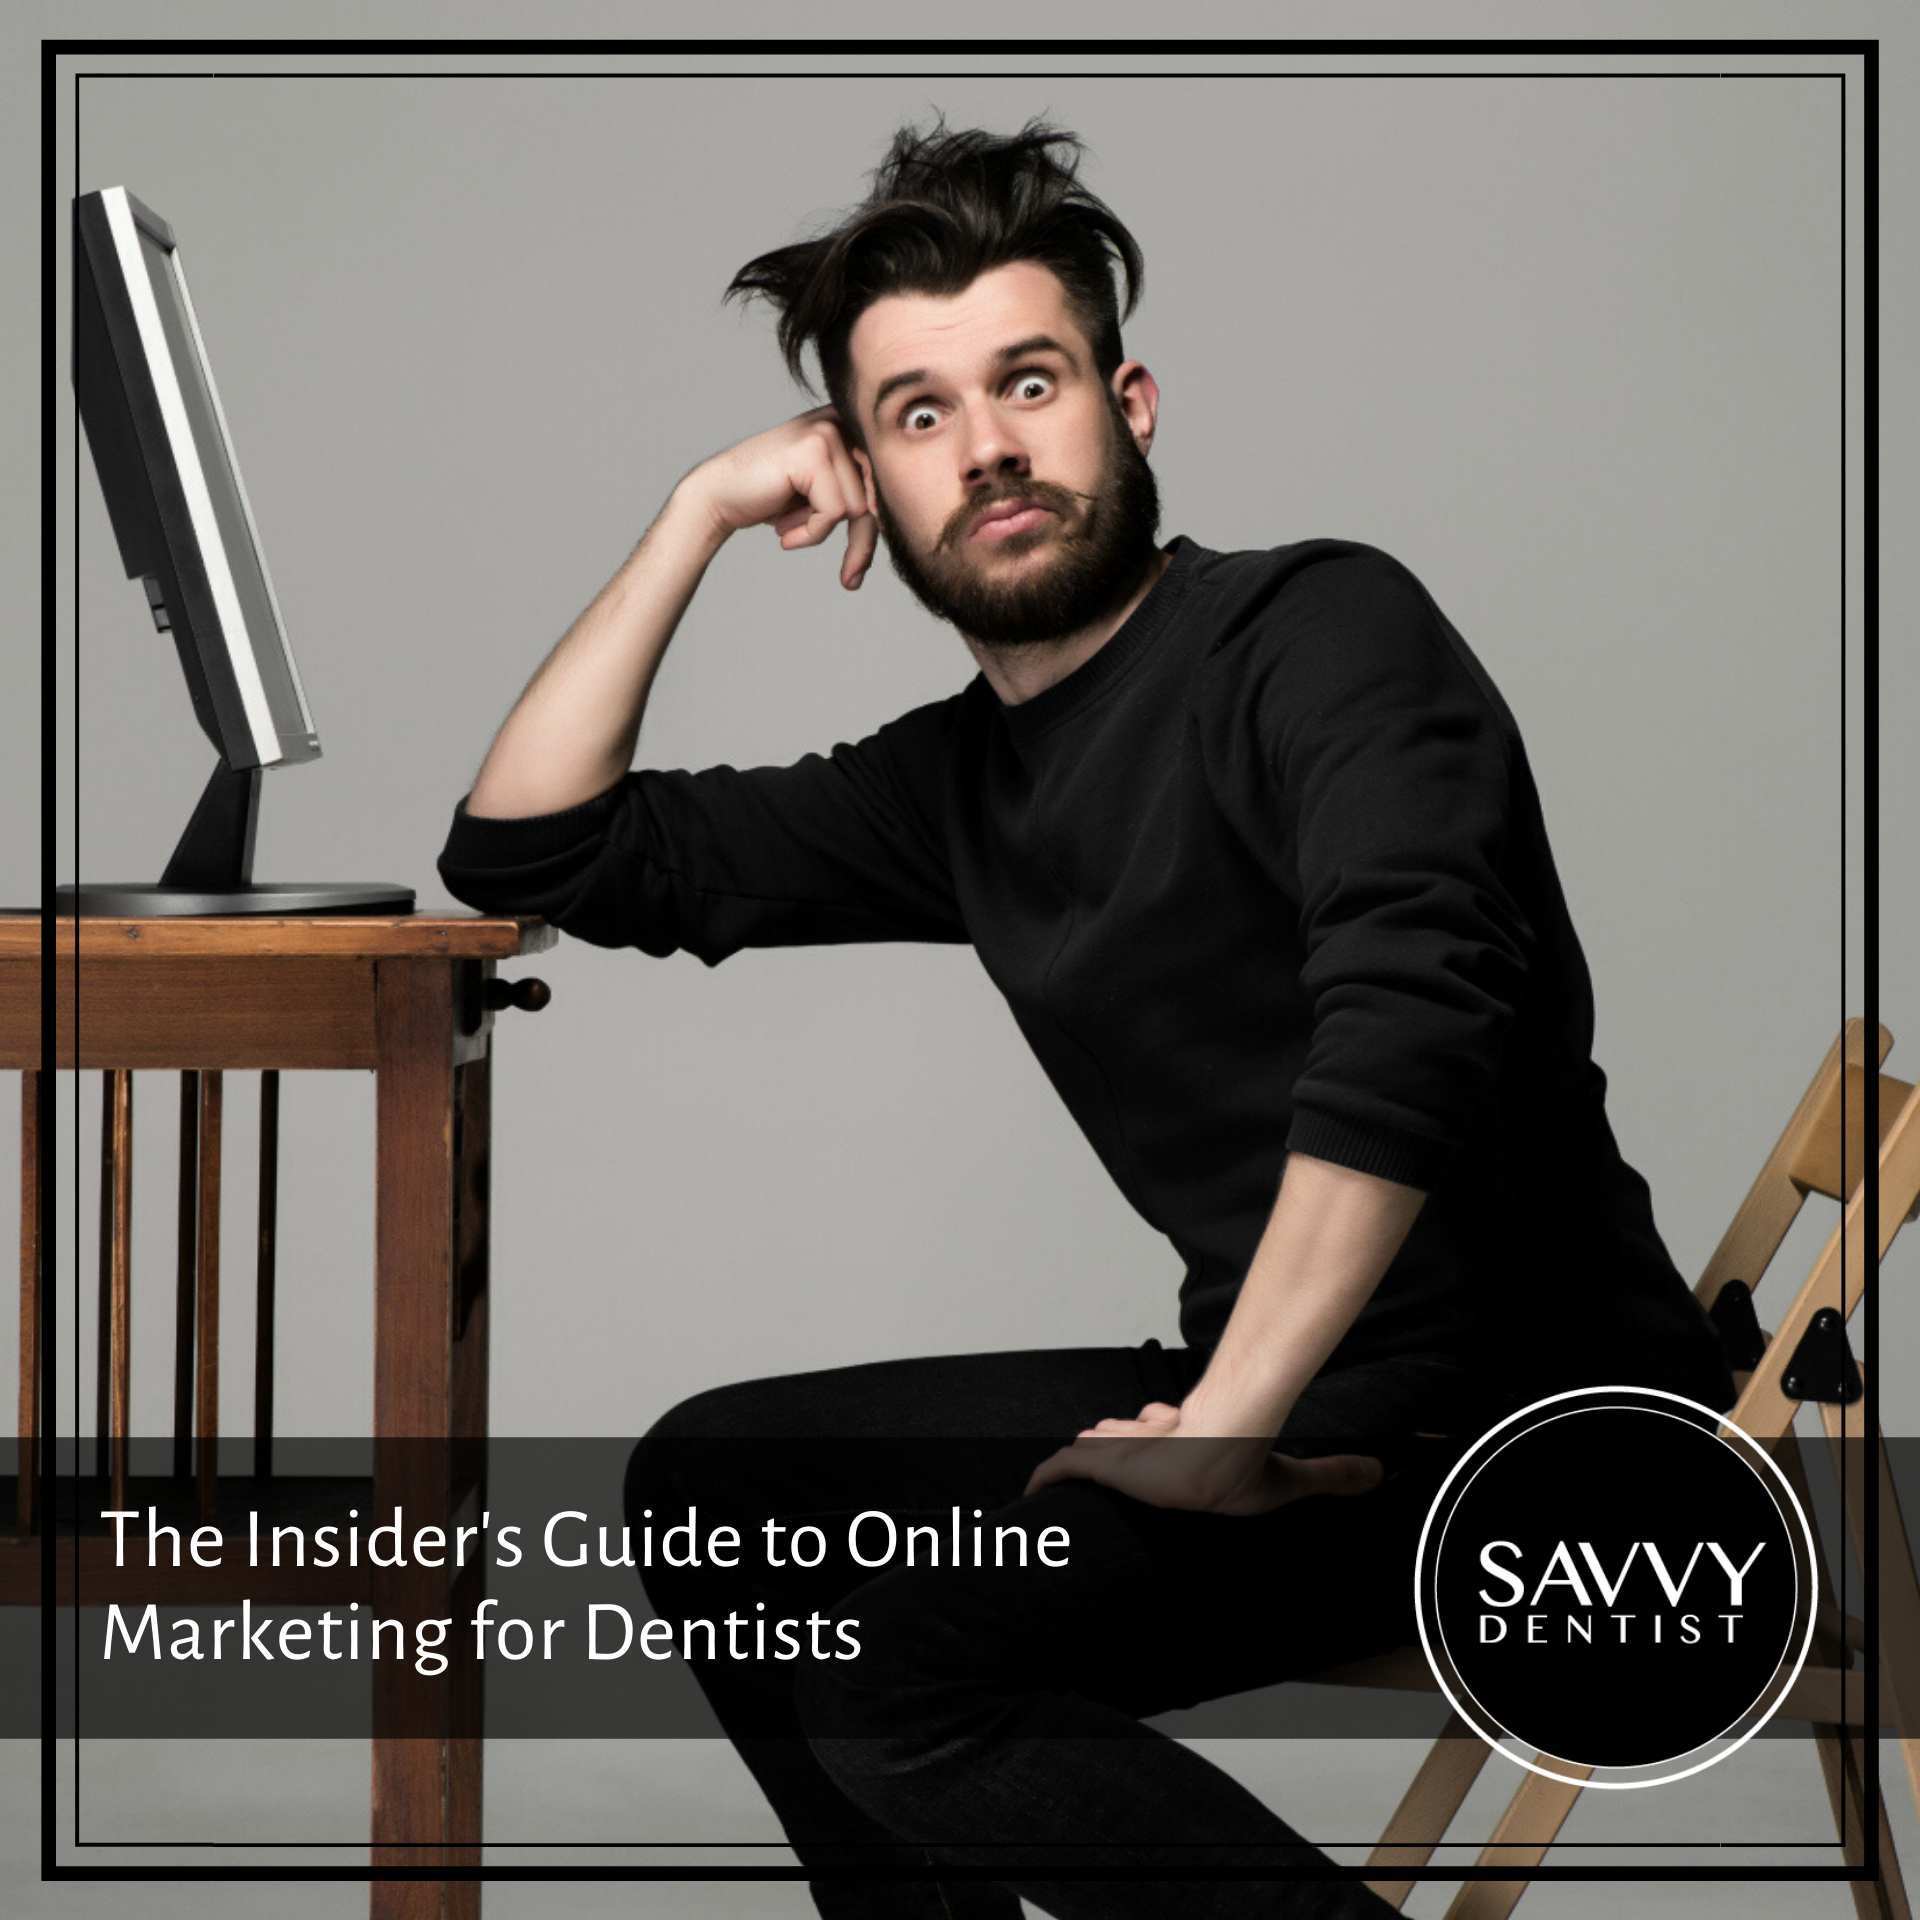 The Insider’s Guide to Online Marketing for Dentists